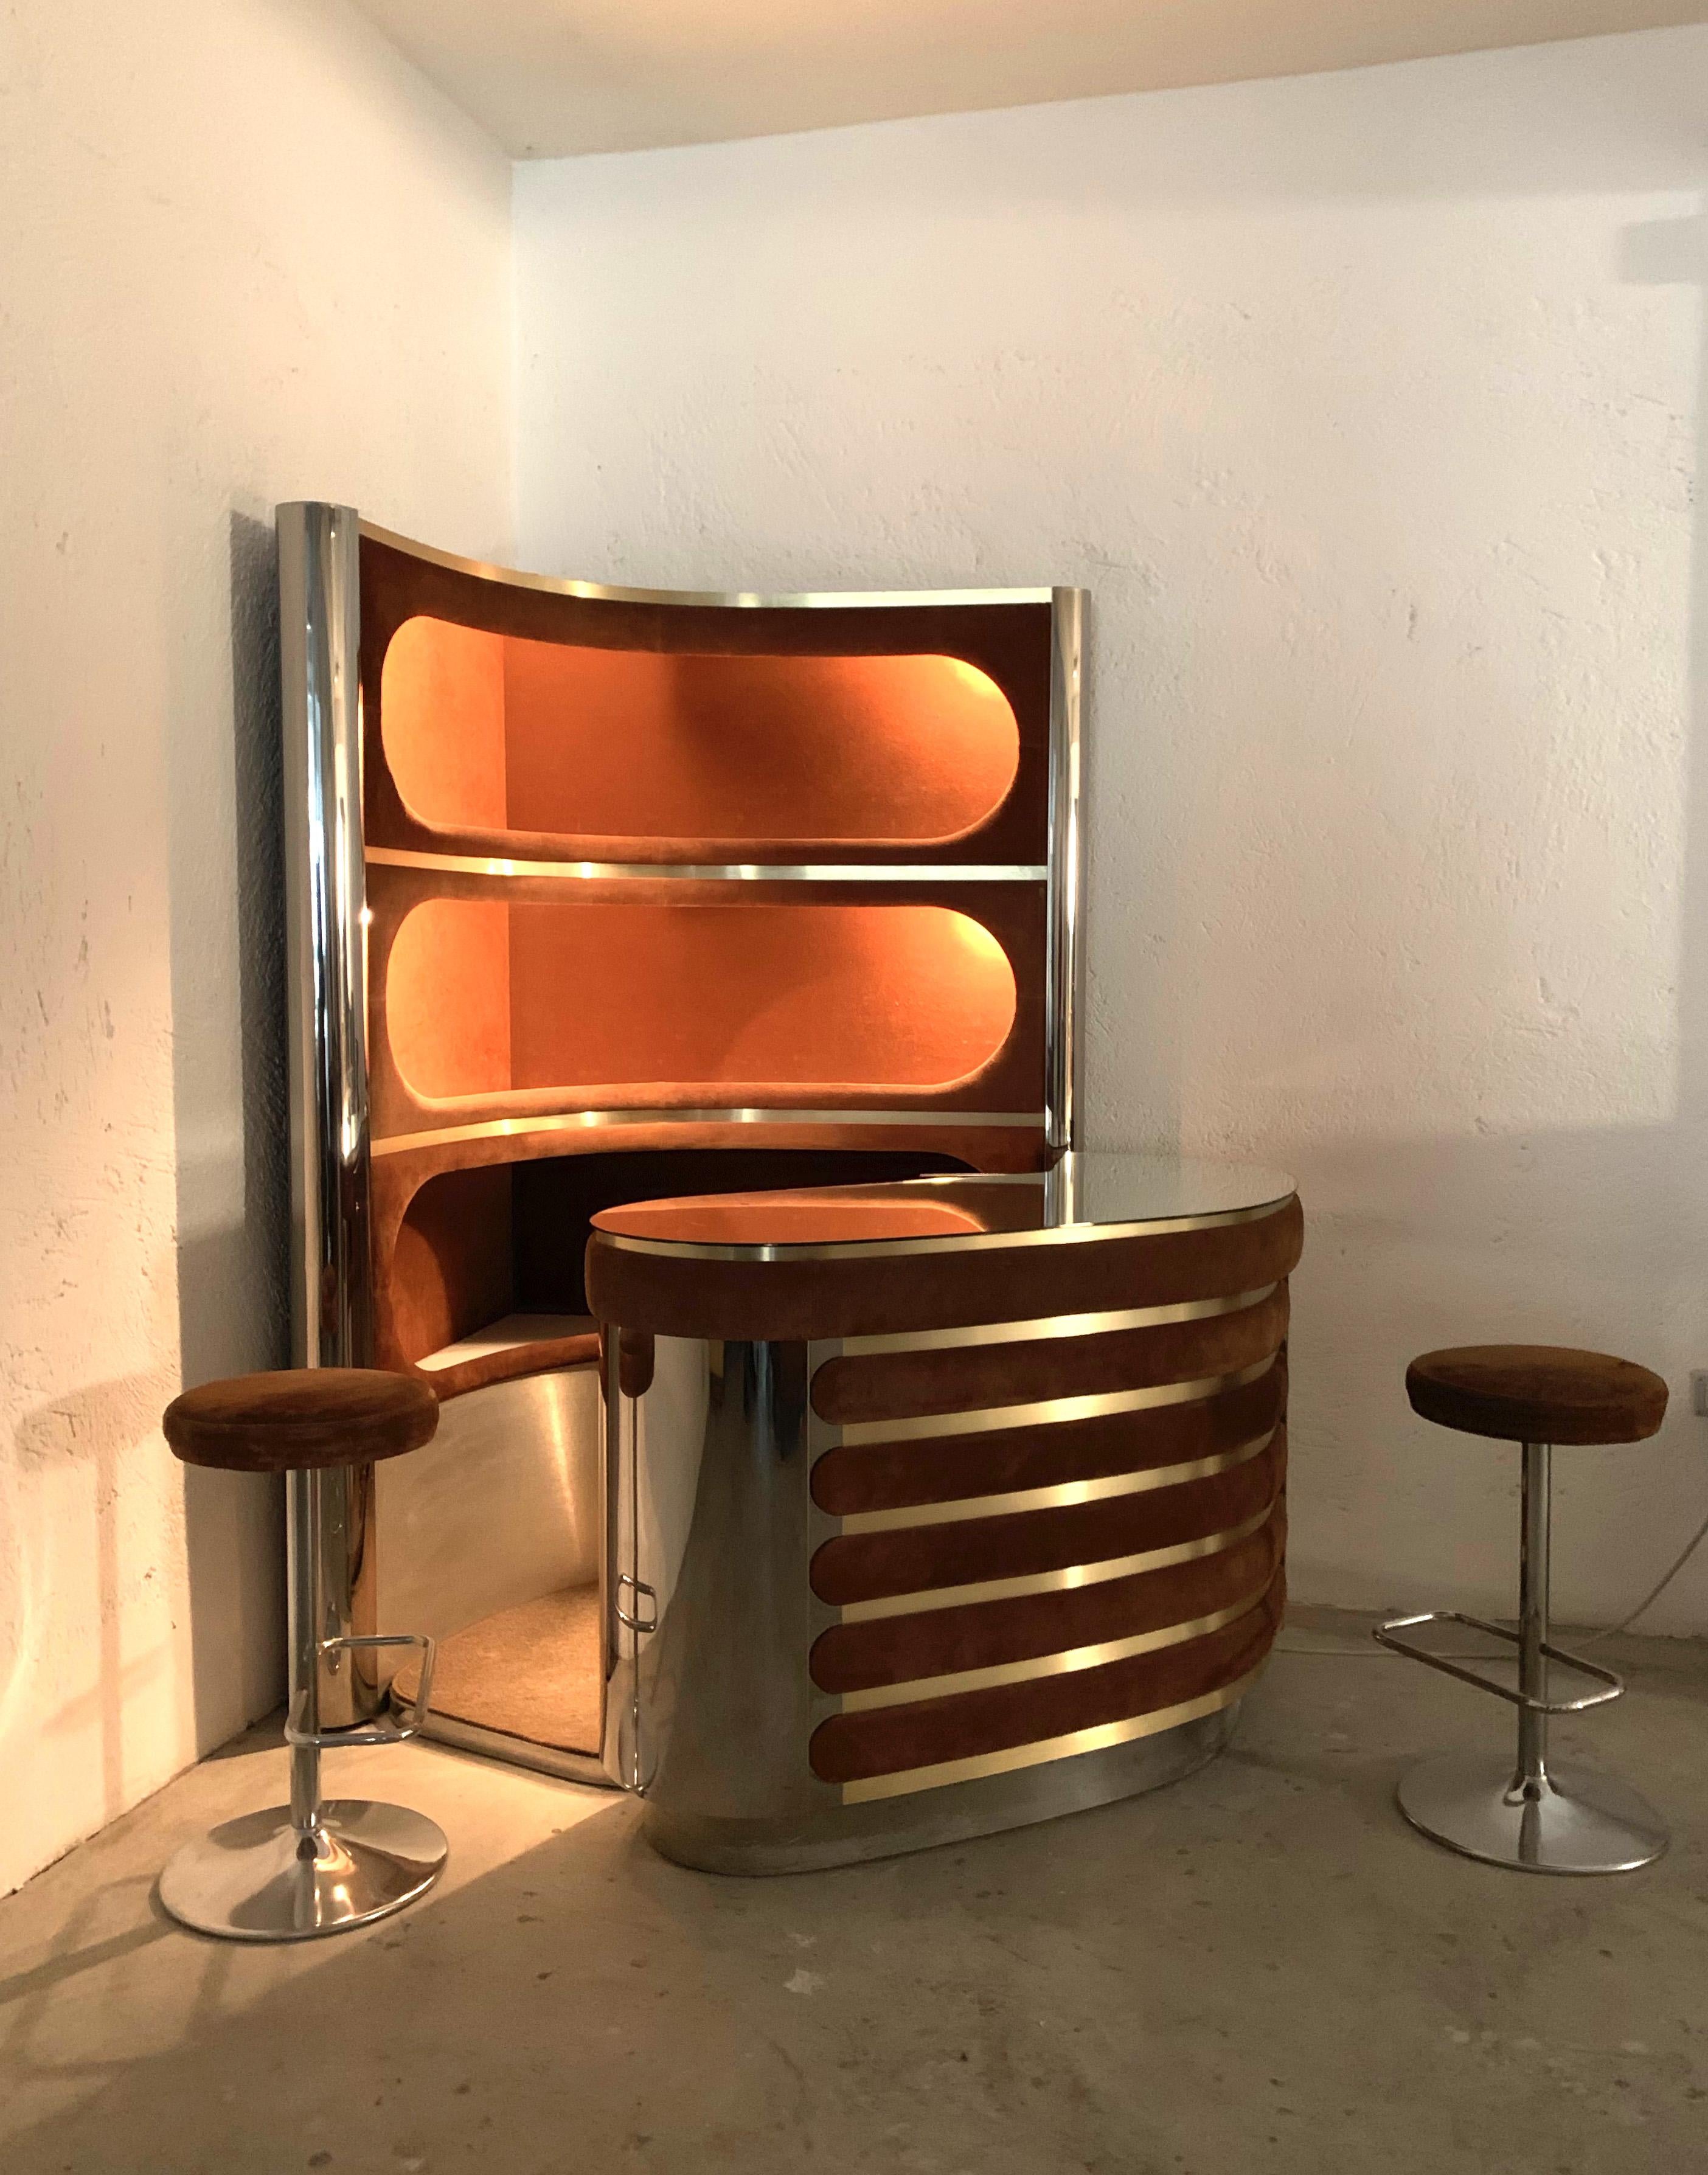 Illuminated bar and warehouse in the style of Willy Rizzo, Italy, early 1970s. The set includes a counter with a mirrored glass top, chrome sides and a suede front panel. A fridge is installed below. The storage unit offers three corner shelves,